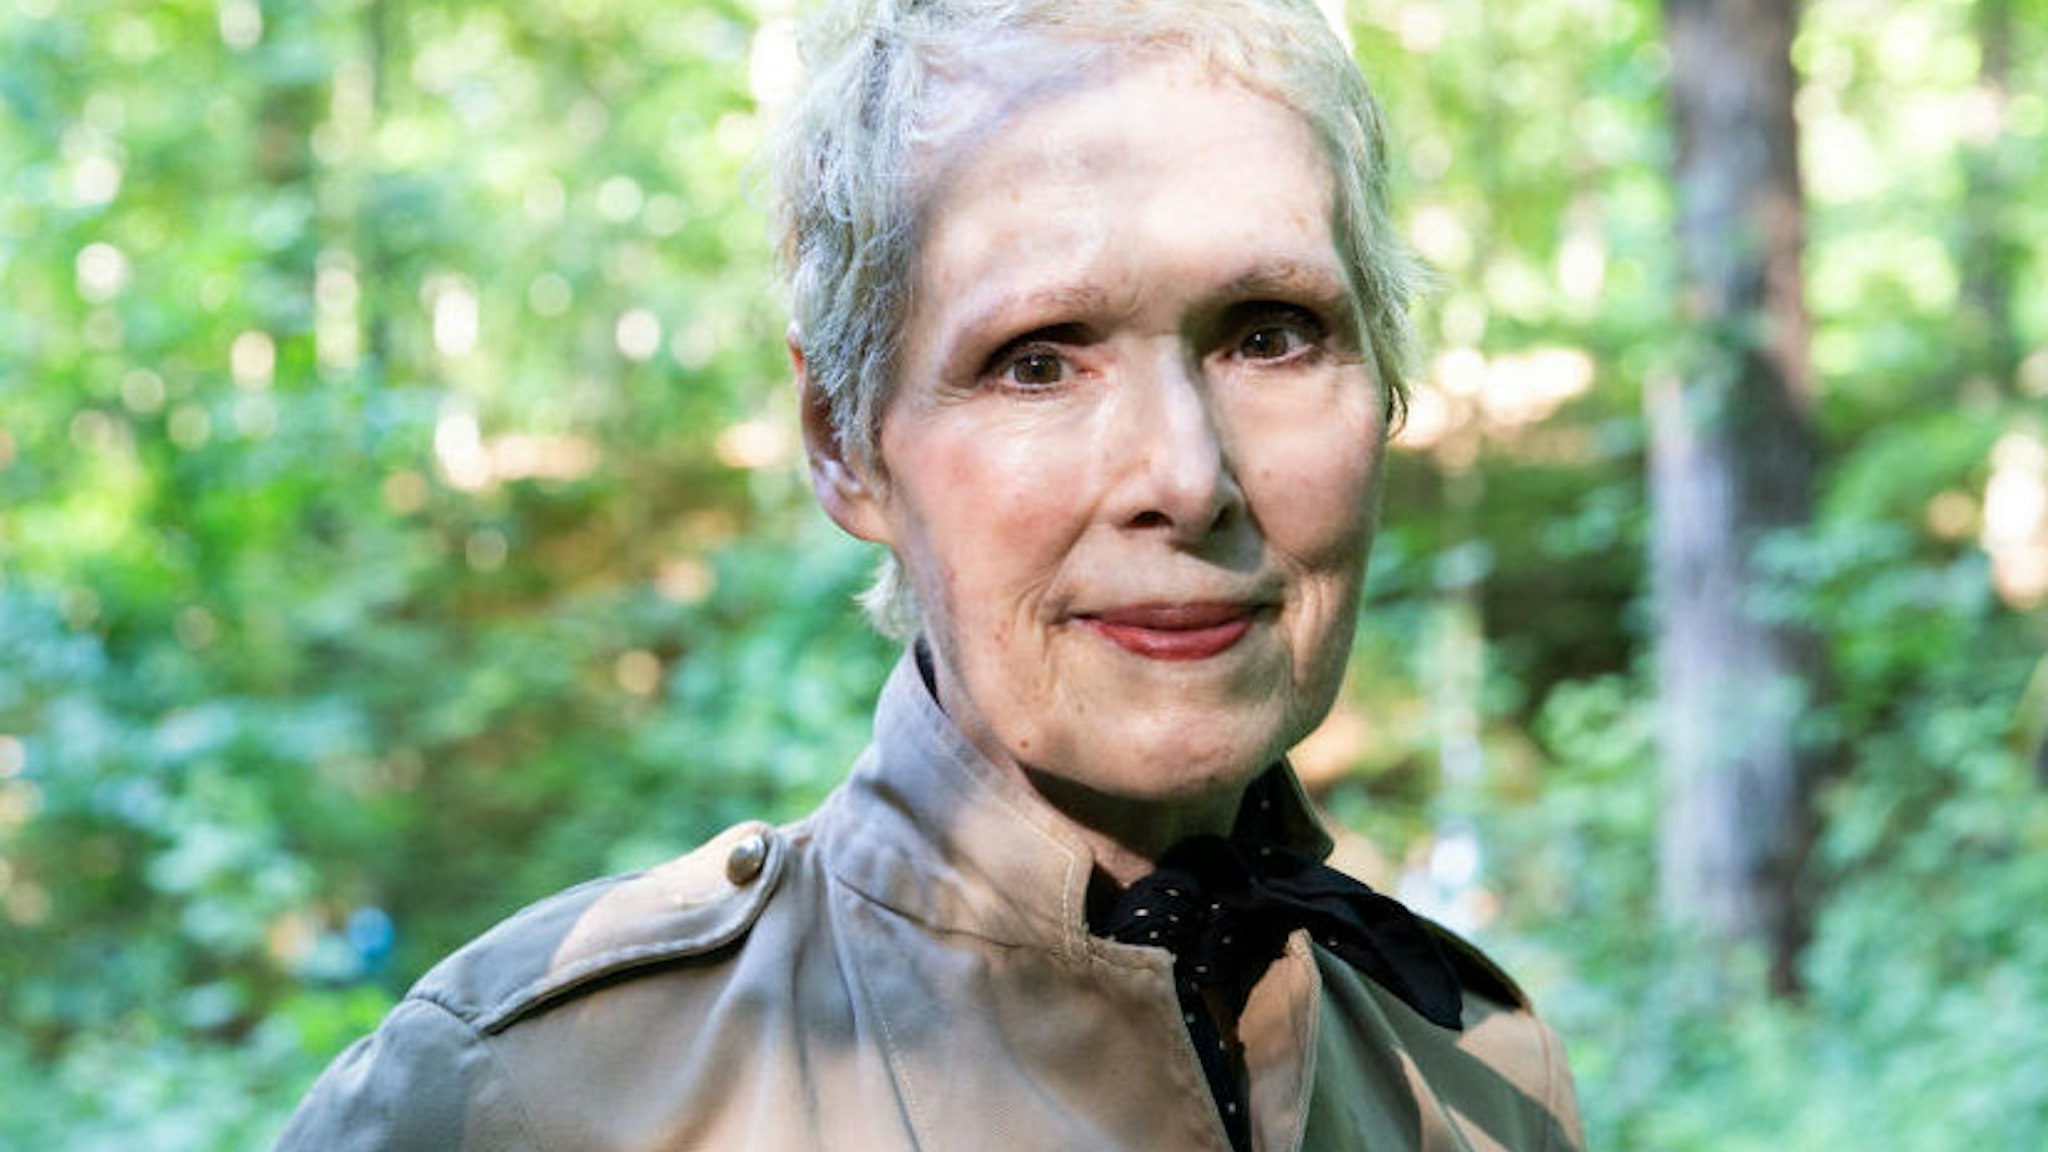 WARWICK, NEW YORK - JUNE 21, 2019: E. Jean Carroll at her home in Warwick, NY. Carroll claims that Donald Trump sexually assaulted her in a dressing room at a Manhattan department store in the mid-1990s. Trump denies knowing Carroll.